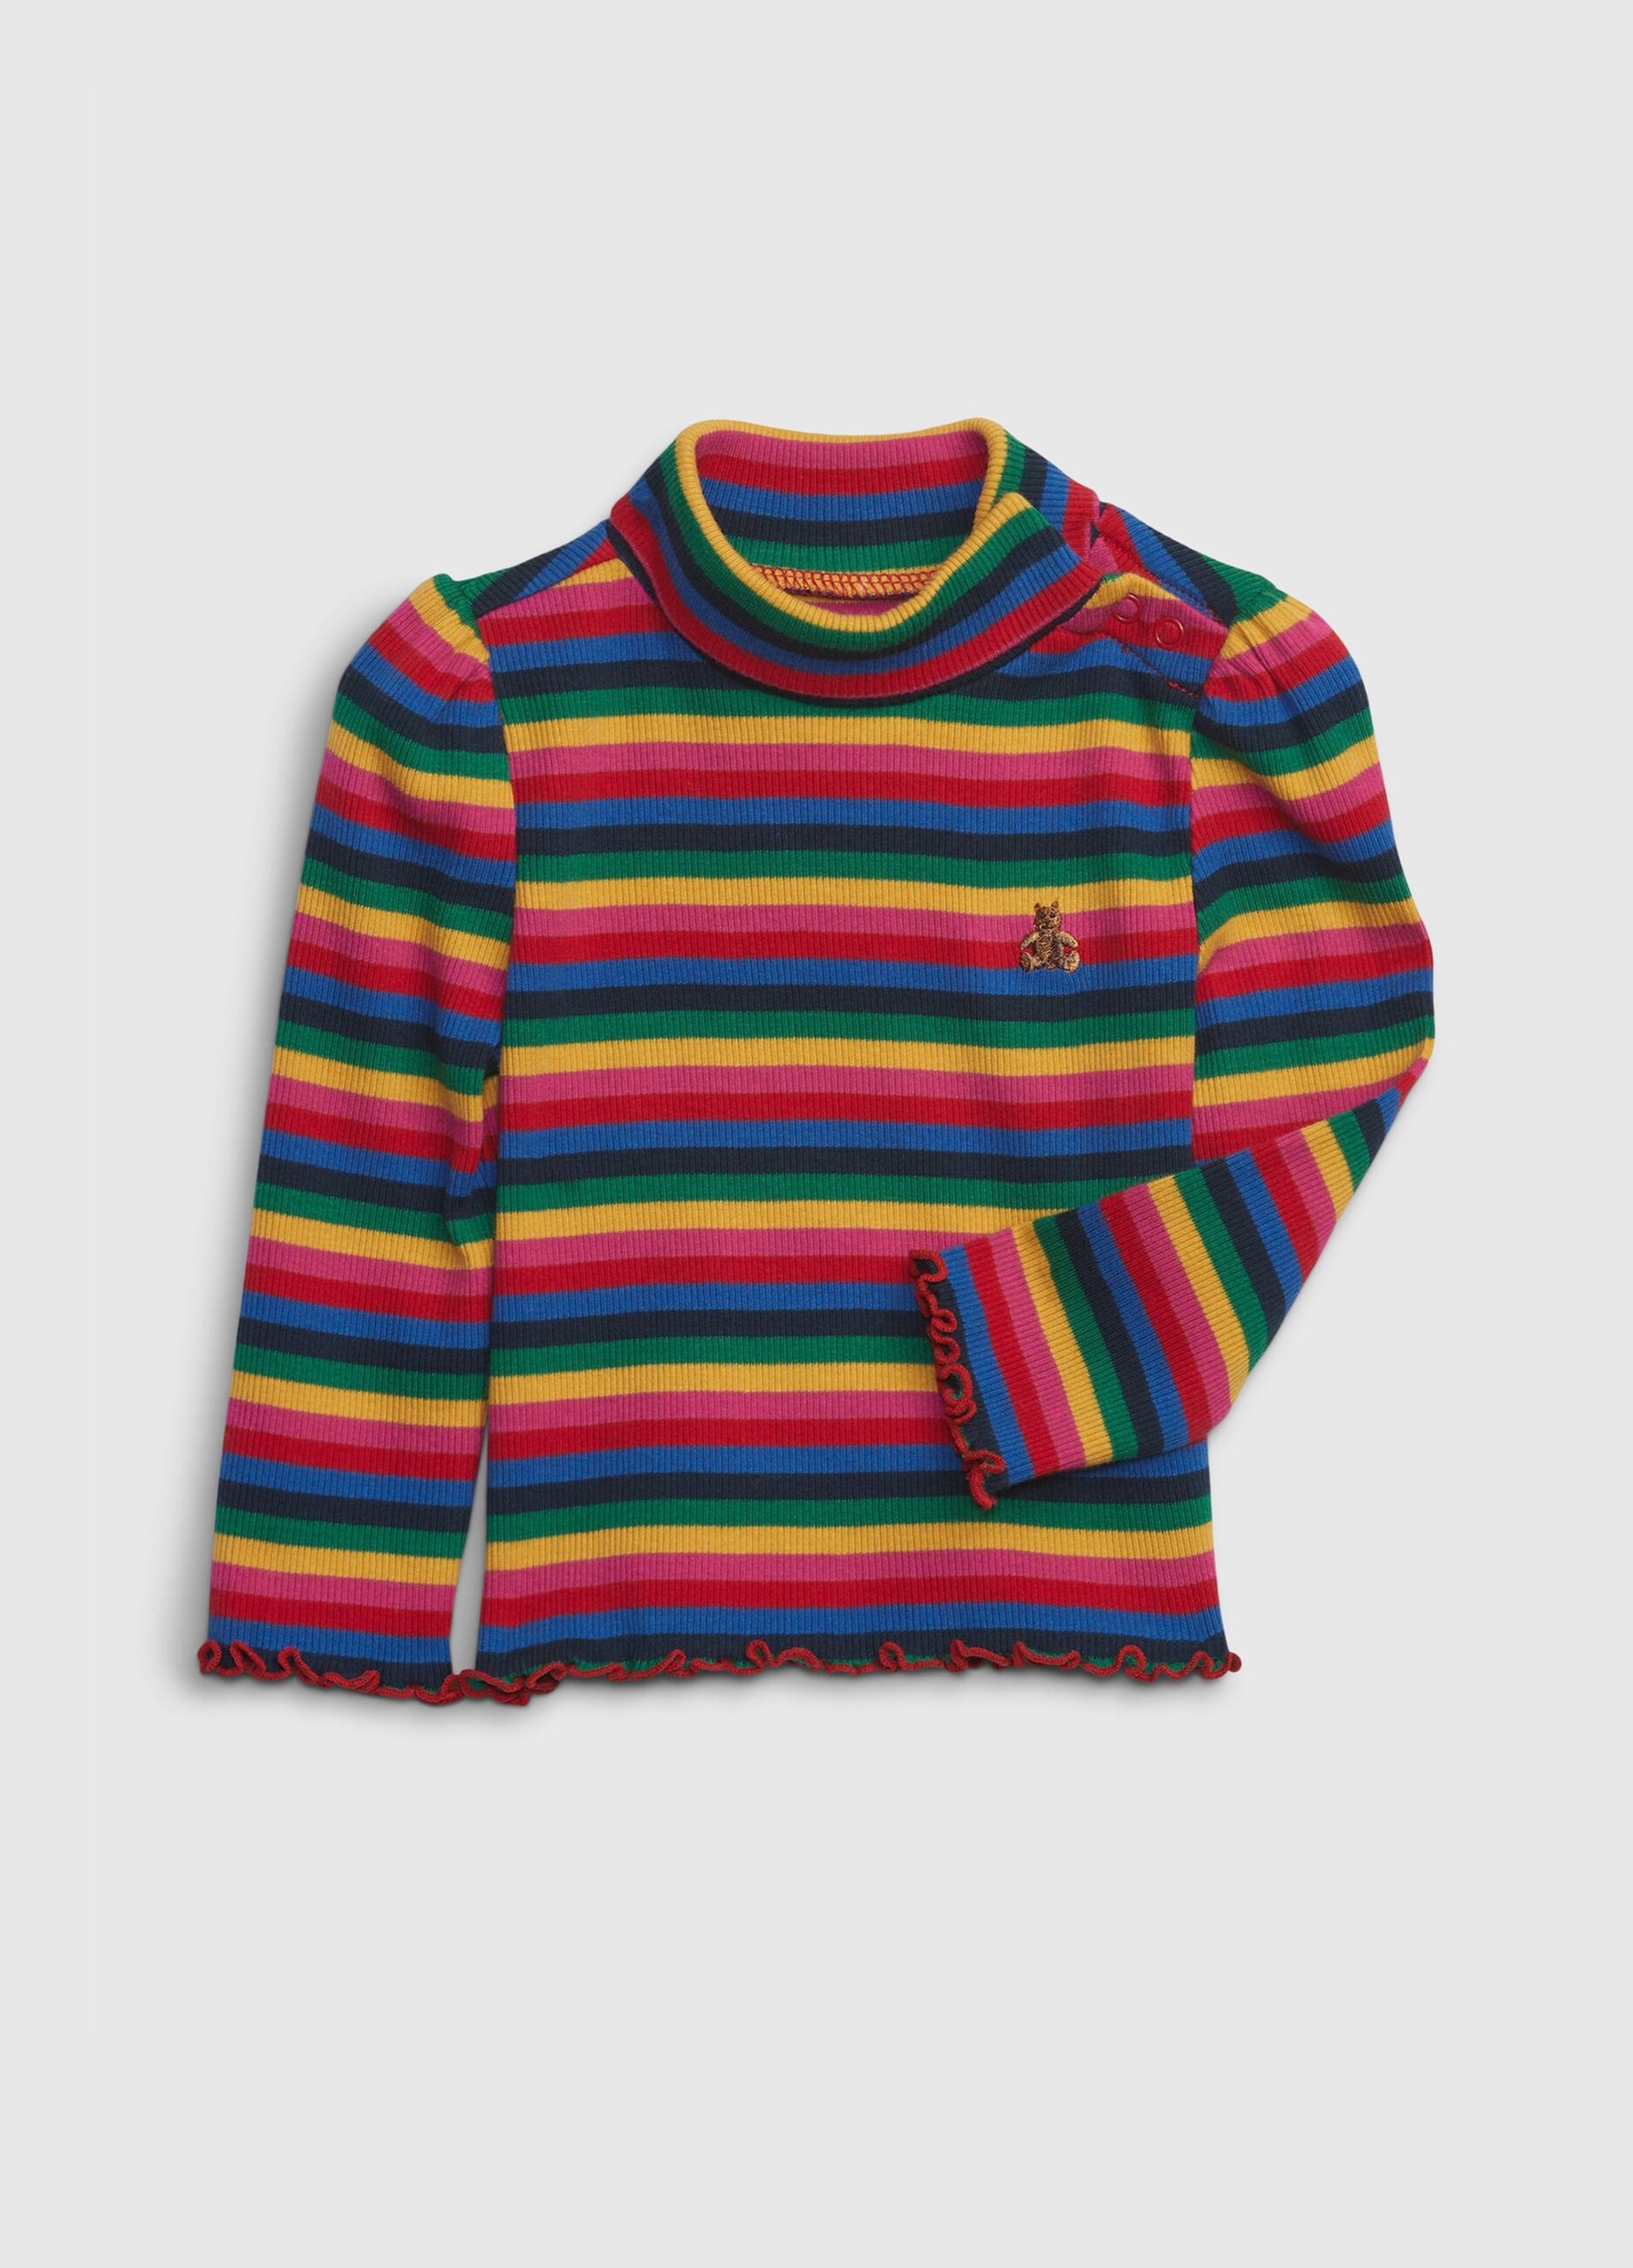 Multicoloured striped T-shirt with embroidered bear